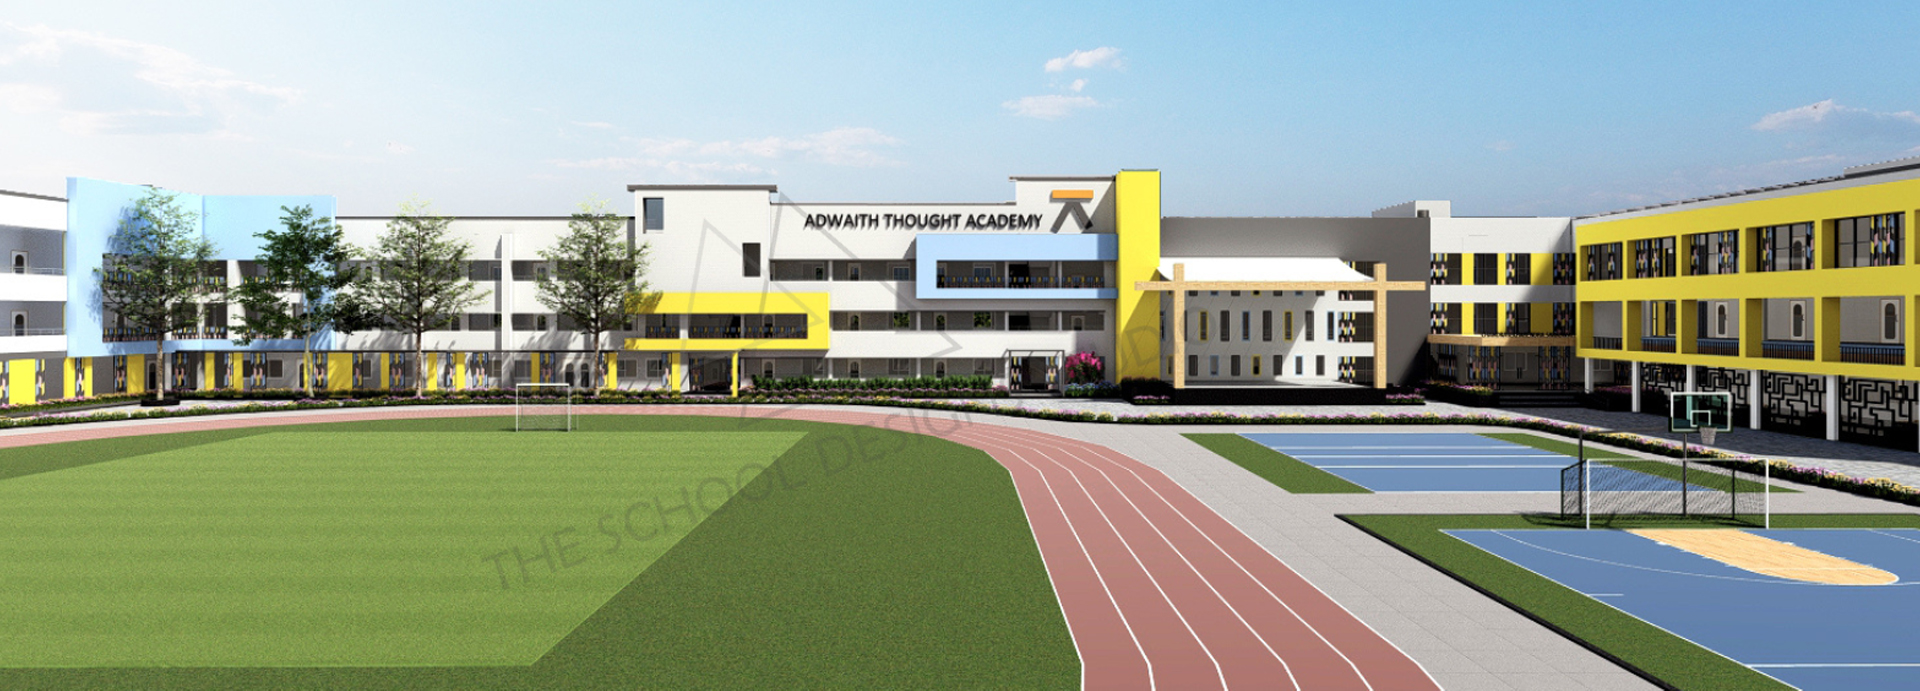 Adwaith Thought Academy, Coimbatore. Designed by The School Designs Studio (Best School Design Architecture Firm In India).